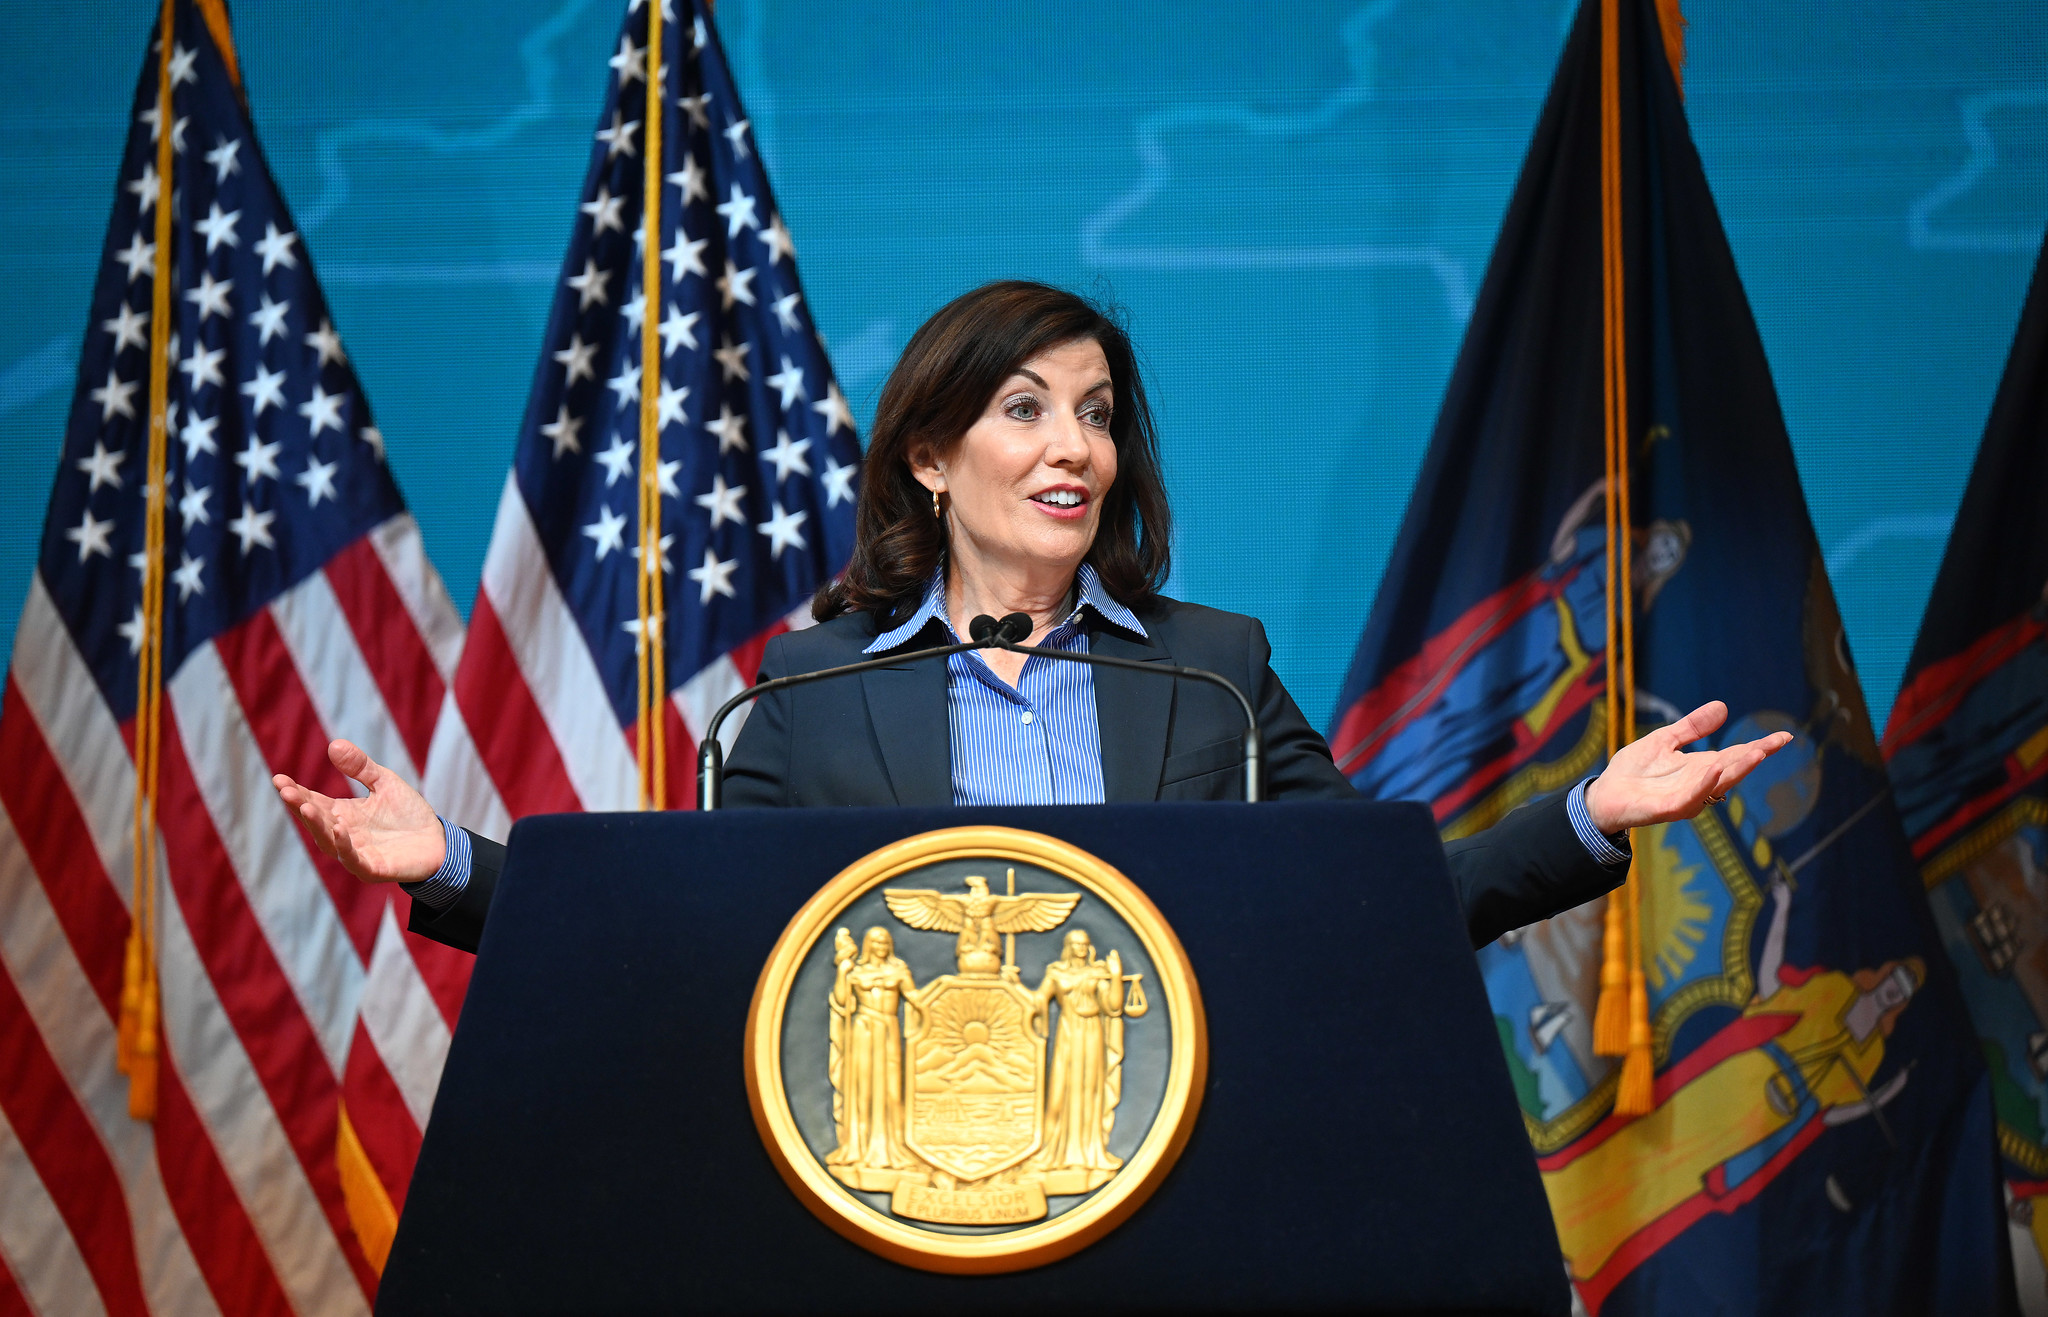 Governor Kathy Hochul speaks at a podium with her arms outstretched.